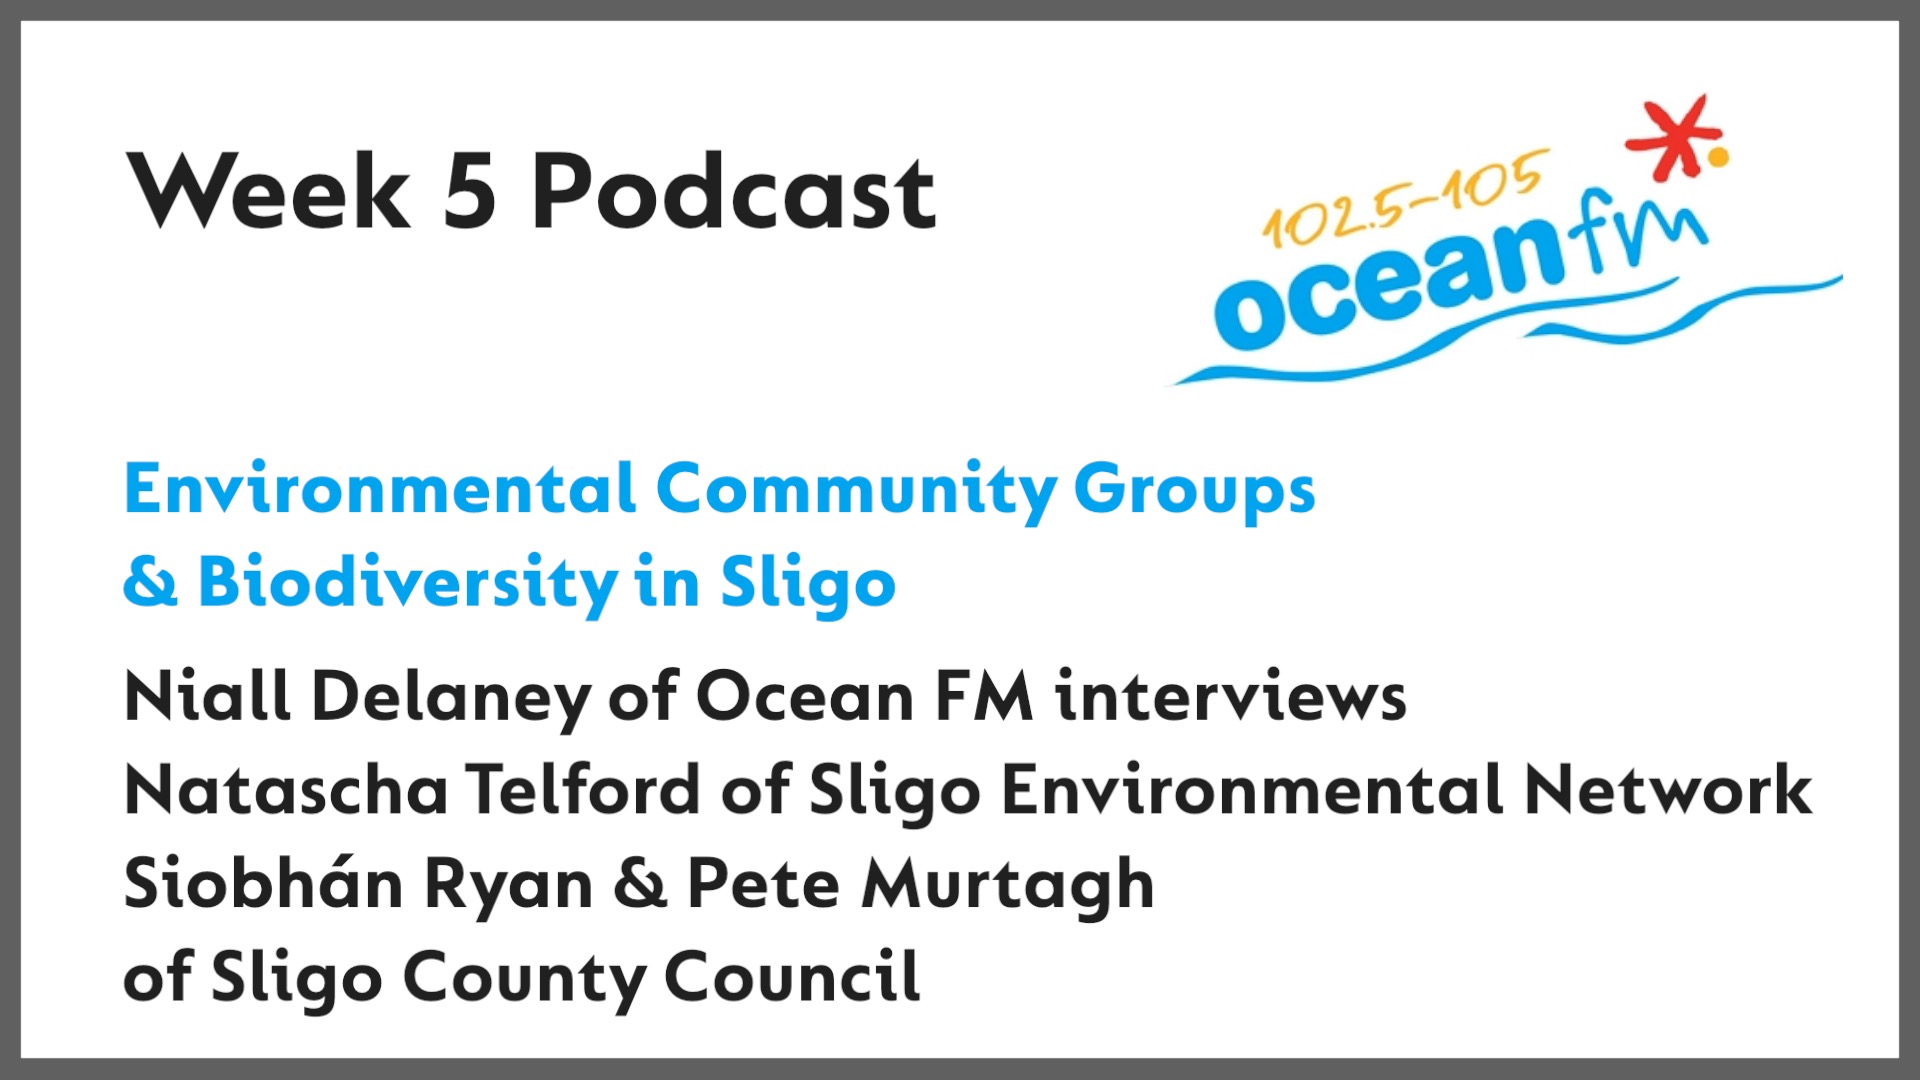 Biodiversity and the Environment - Ocean FM interview